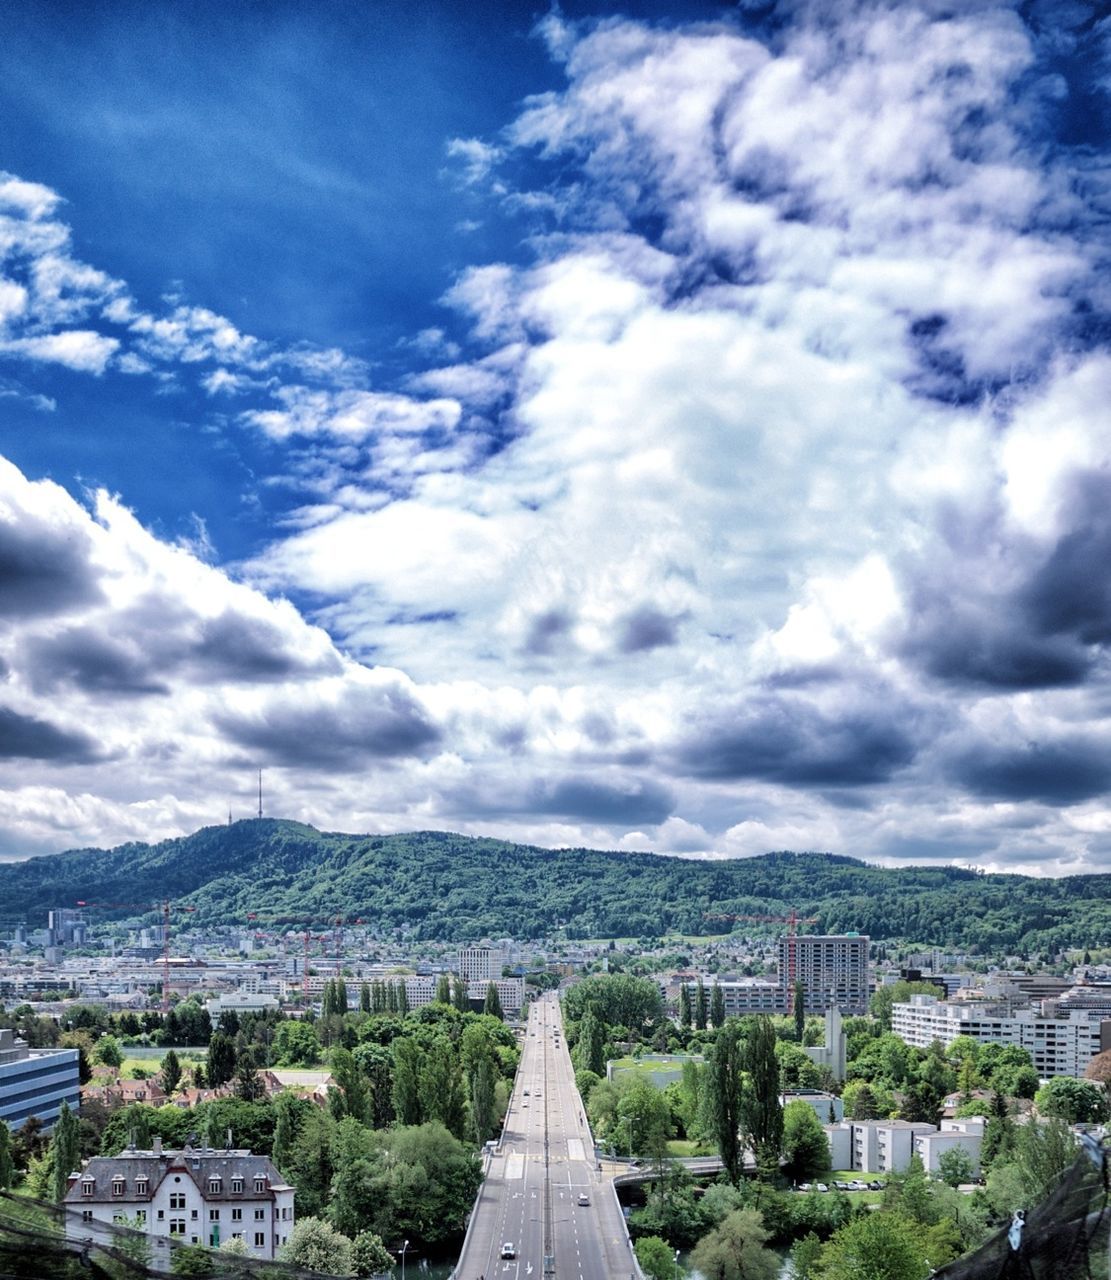 sky, architecture, cloud - sky, built structure, building exterior, the way forward, cloudy, cloud, mountain, transportation, road, tree, diminishing perspective, vanishing point, city, town, mountain range, high angle view, day, outdoors